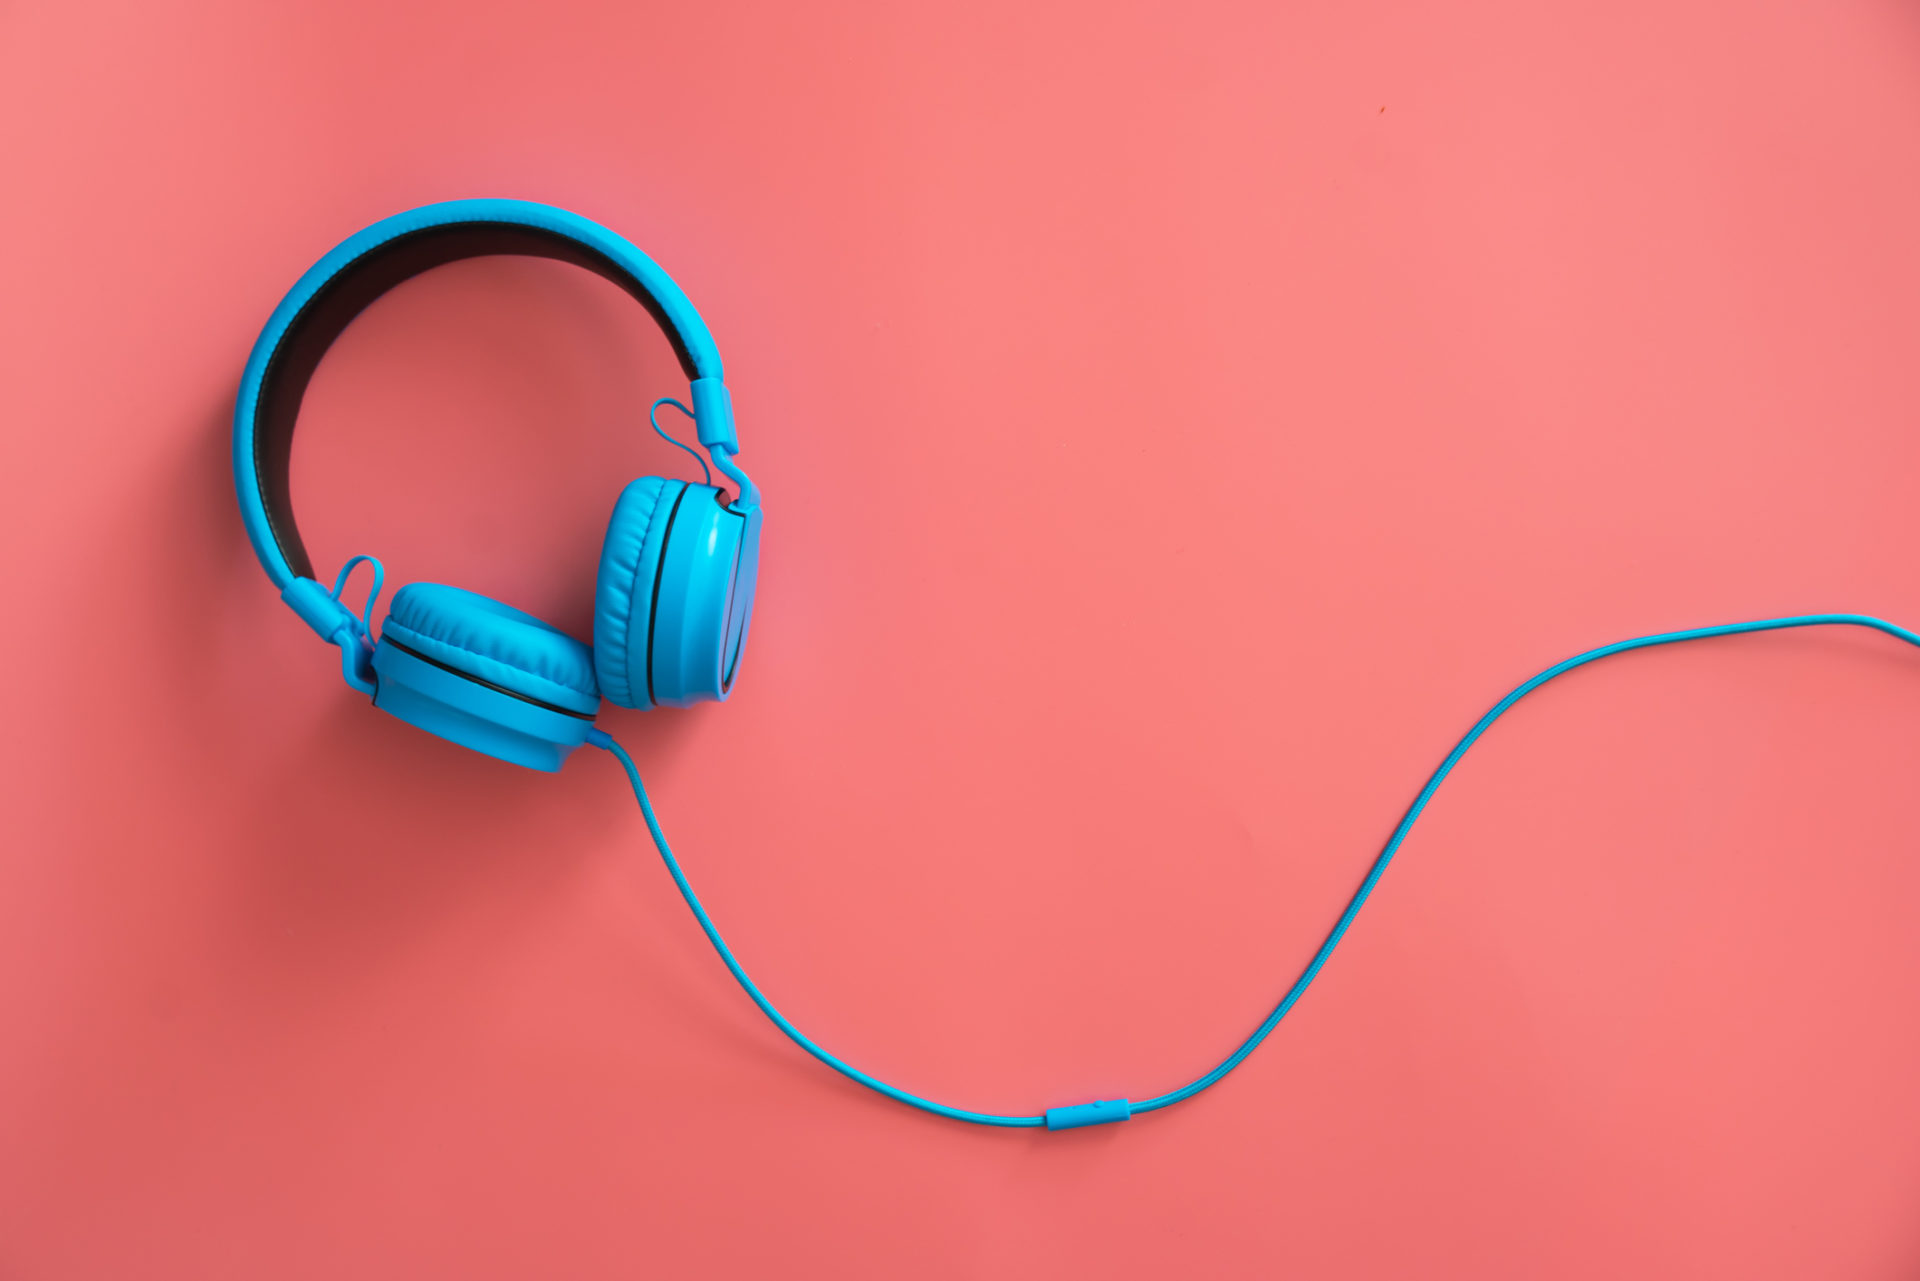 Headphones on the pink background